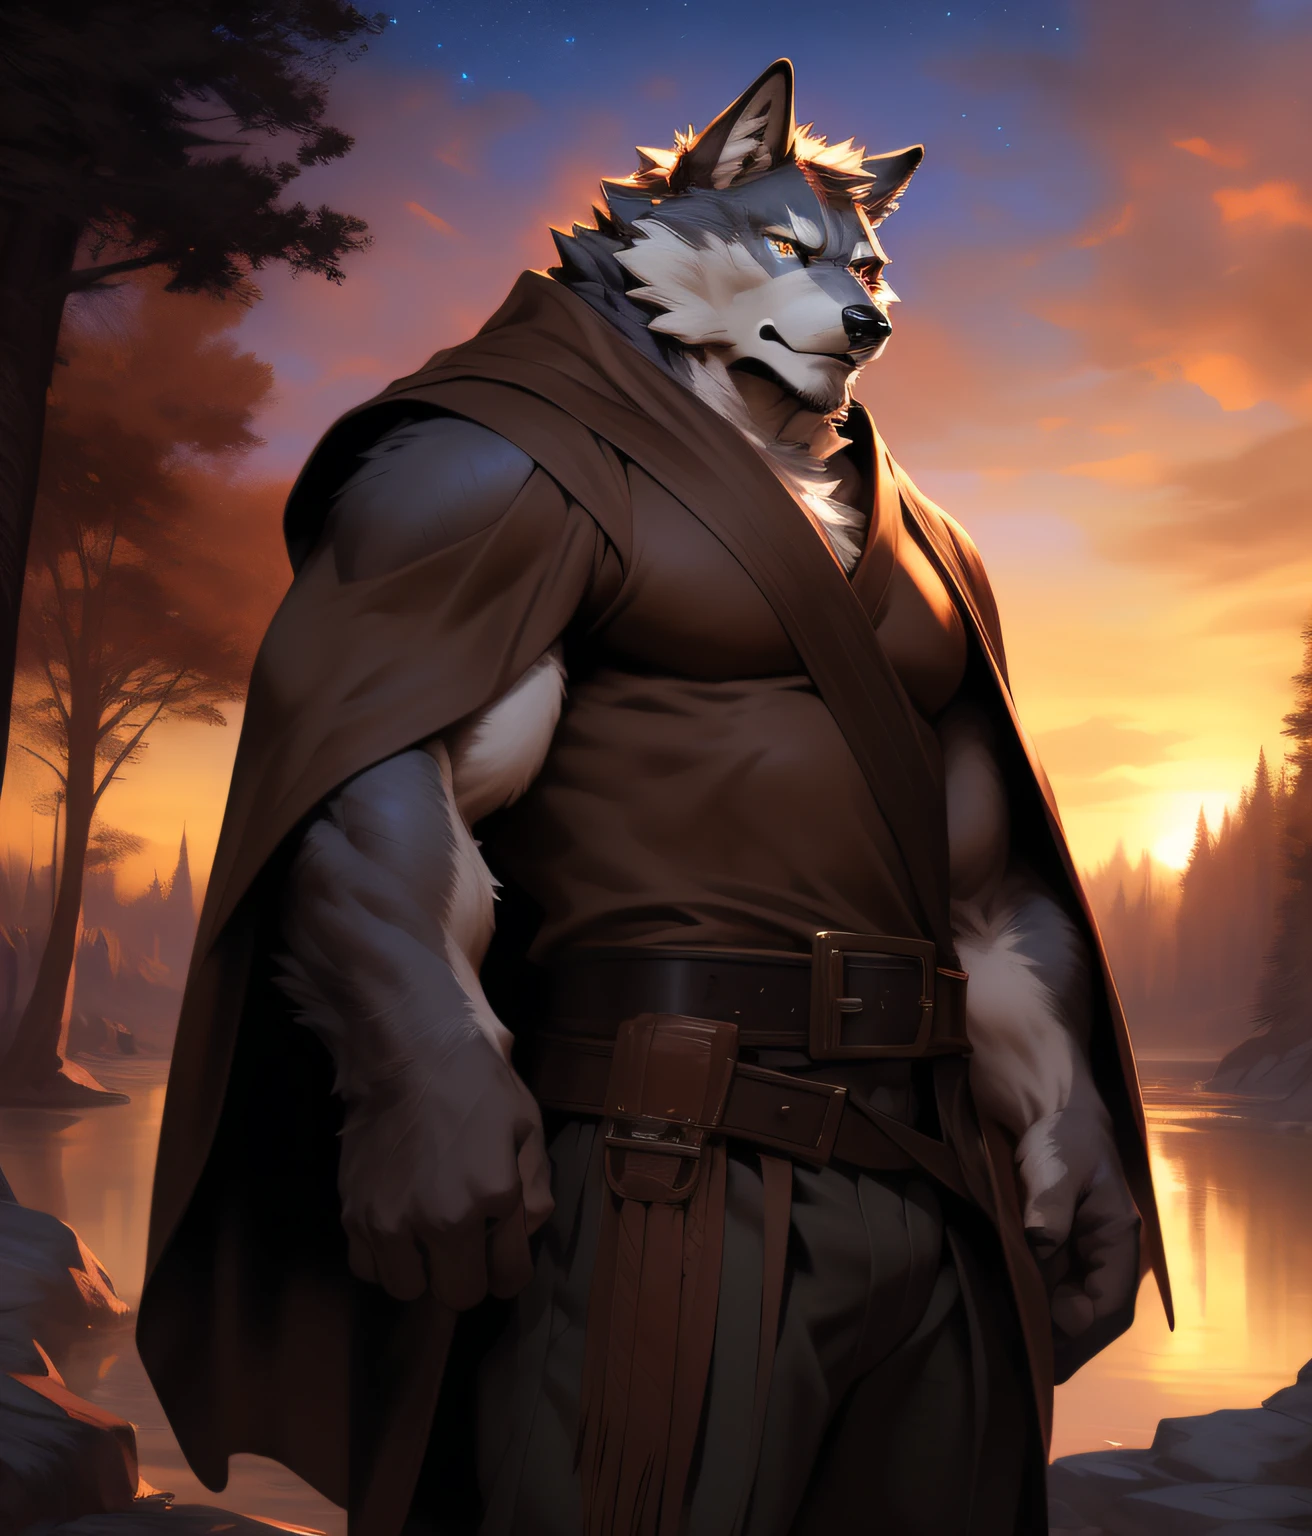 sunset. lobo, in partial shadows, brown cape. brown dress, 4k, High resolution, The best quality, perfect colors, perfect shadows, Perfect lighting, Published on E621, hairy body, lobo, gray fur, gray skin, only, masculine, adult, masculine, (strong:1.2), anatomy correct, (photorealistic skin, detailed skin, epic, Masterpiece:1.2), (Dark Fantasy World Background, trees, black sky, sunset, stars visible in the sky), (por Taran Fiddler, by chunie, by traver009, by wfa:1.1), (brown fabric pants, belt with bronze buckle.:1.2), (detailed eyes, gold eyes:1.2), (Half body:1.1), serious face, postura strong, proud, soft shadows, looking at the viewer, messy fur, love, outfit, slightly open tunic.